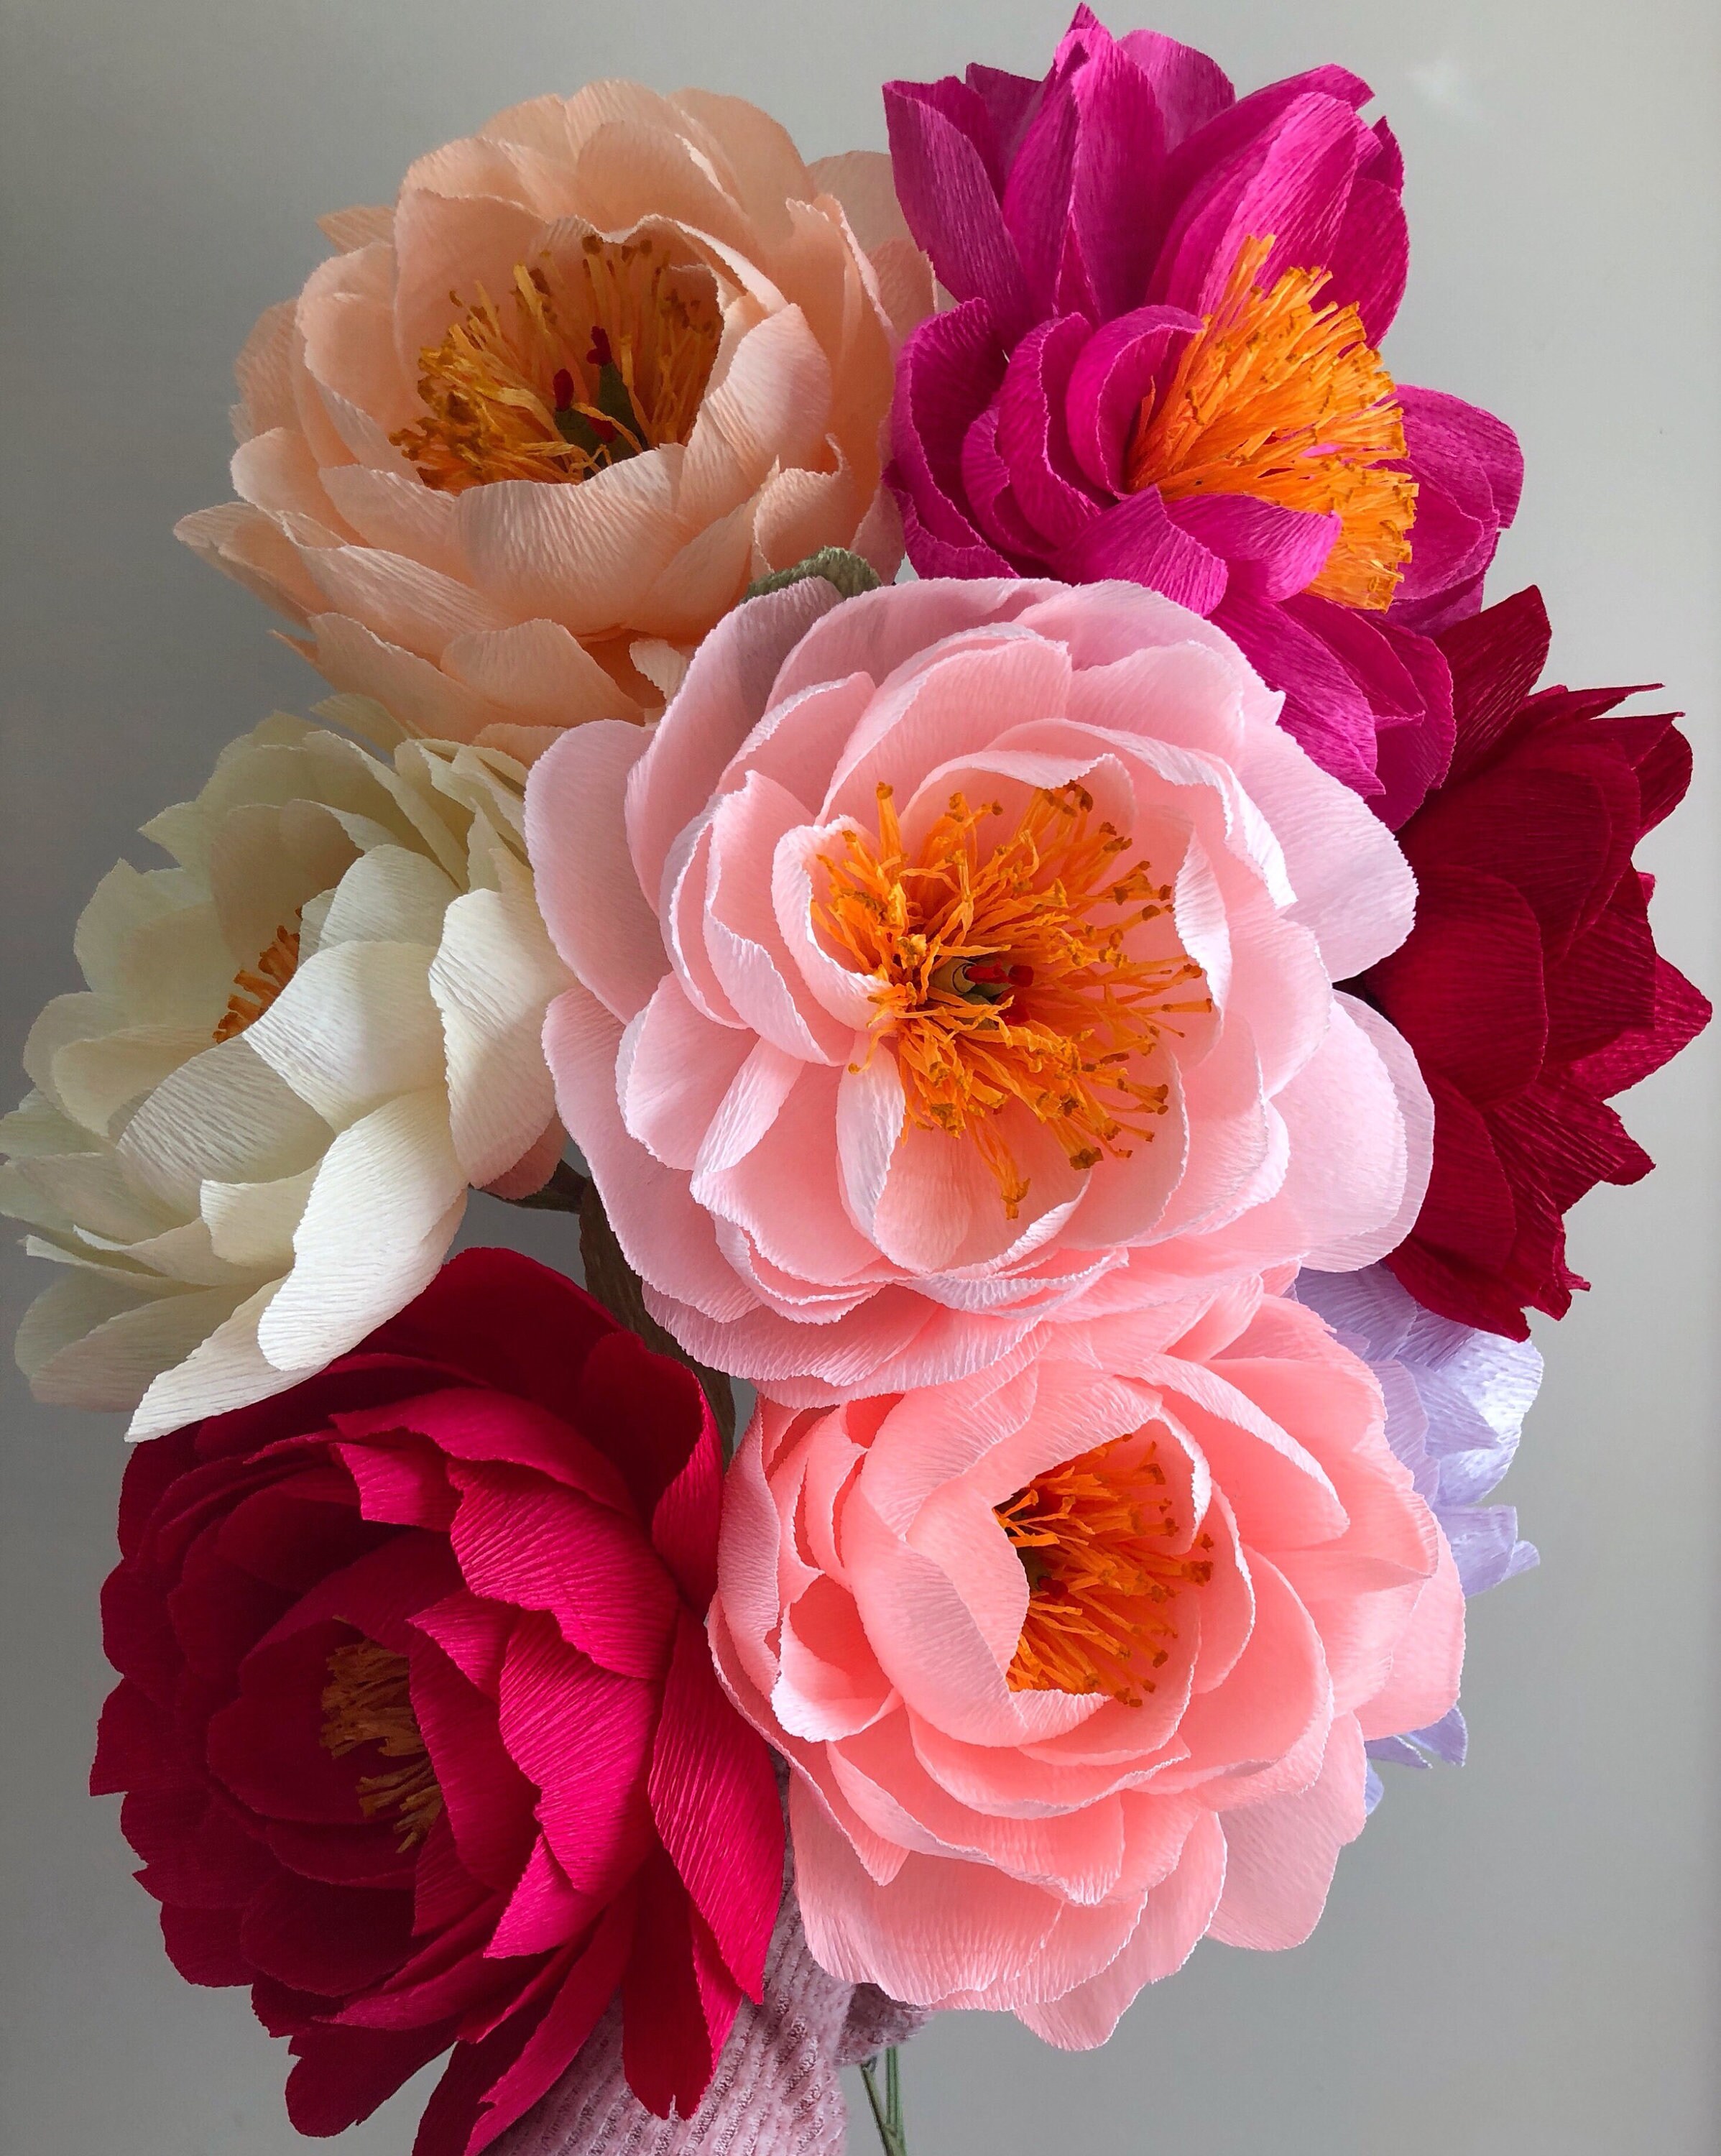 Crepe Paper Peony Wreath Tutorial - or Book Pages